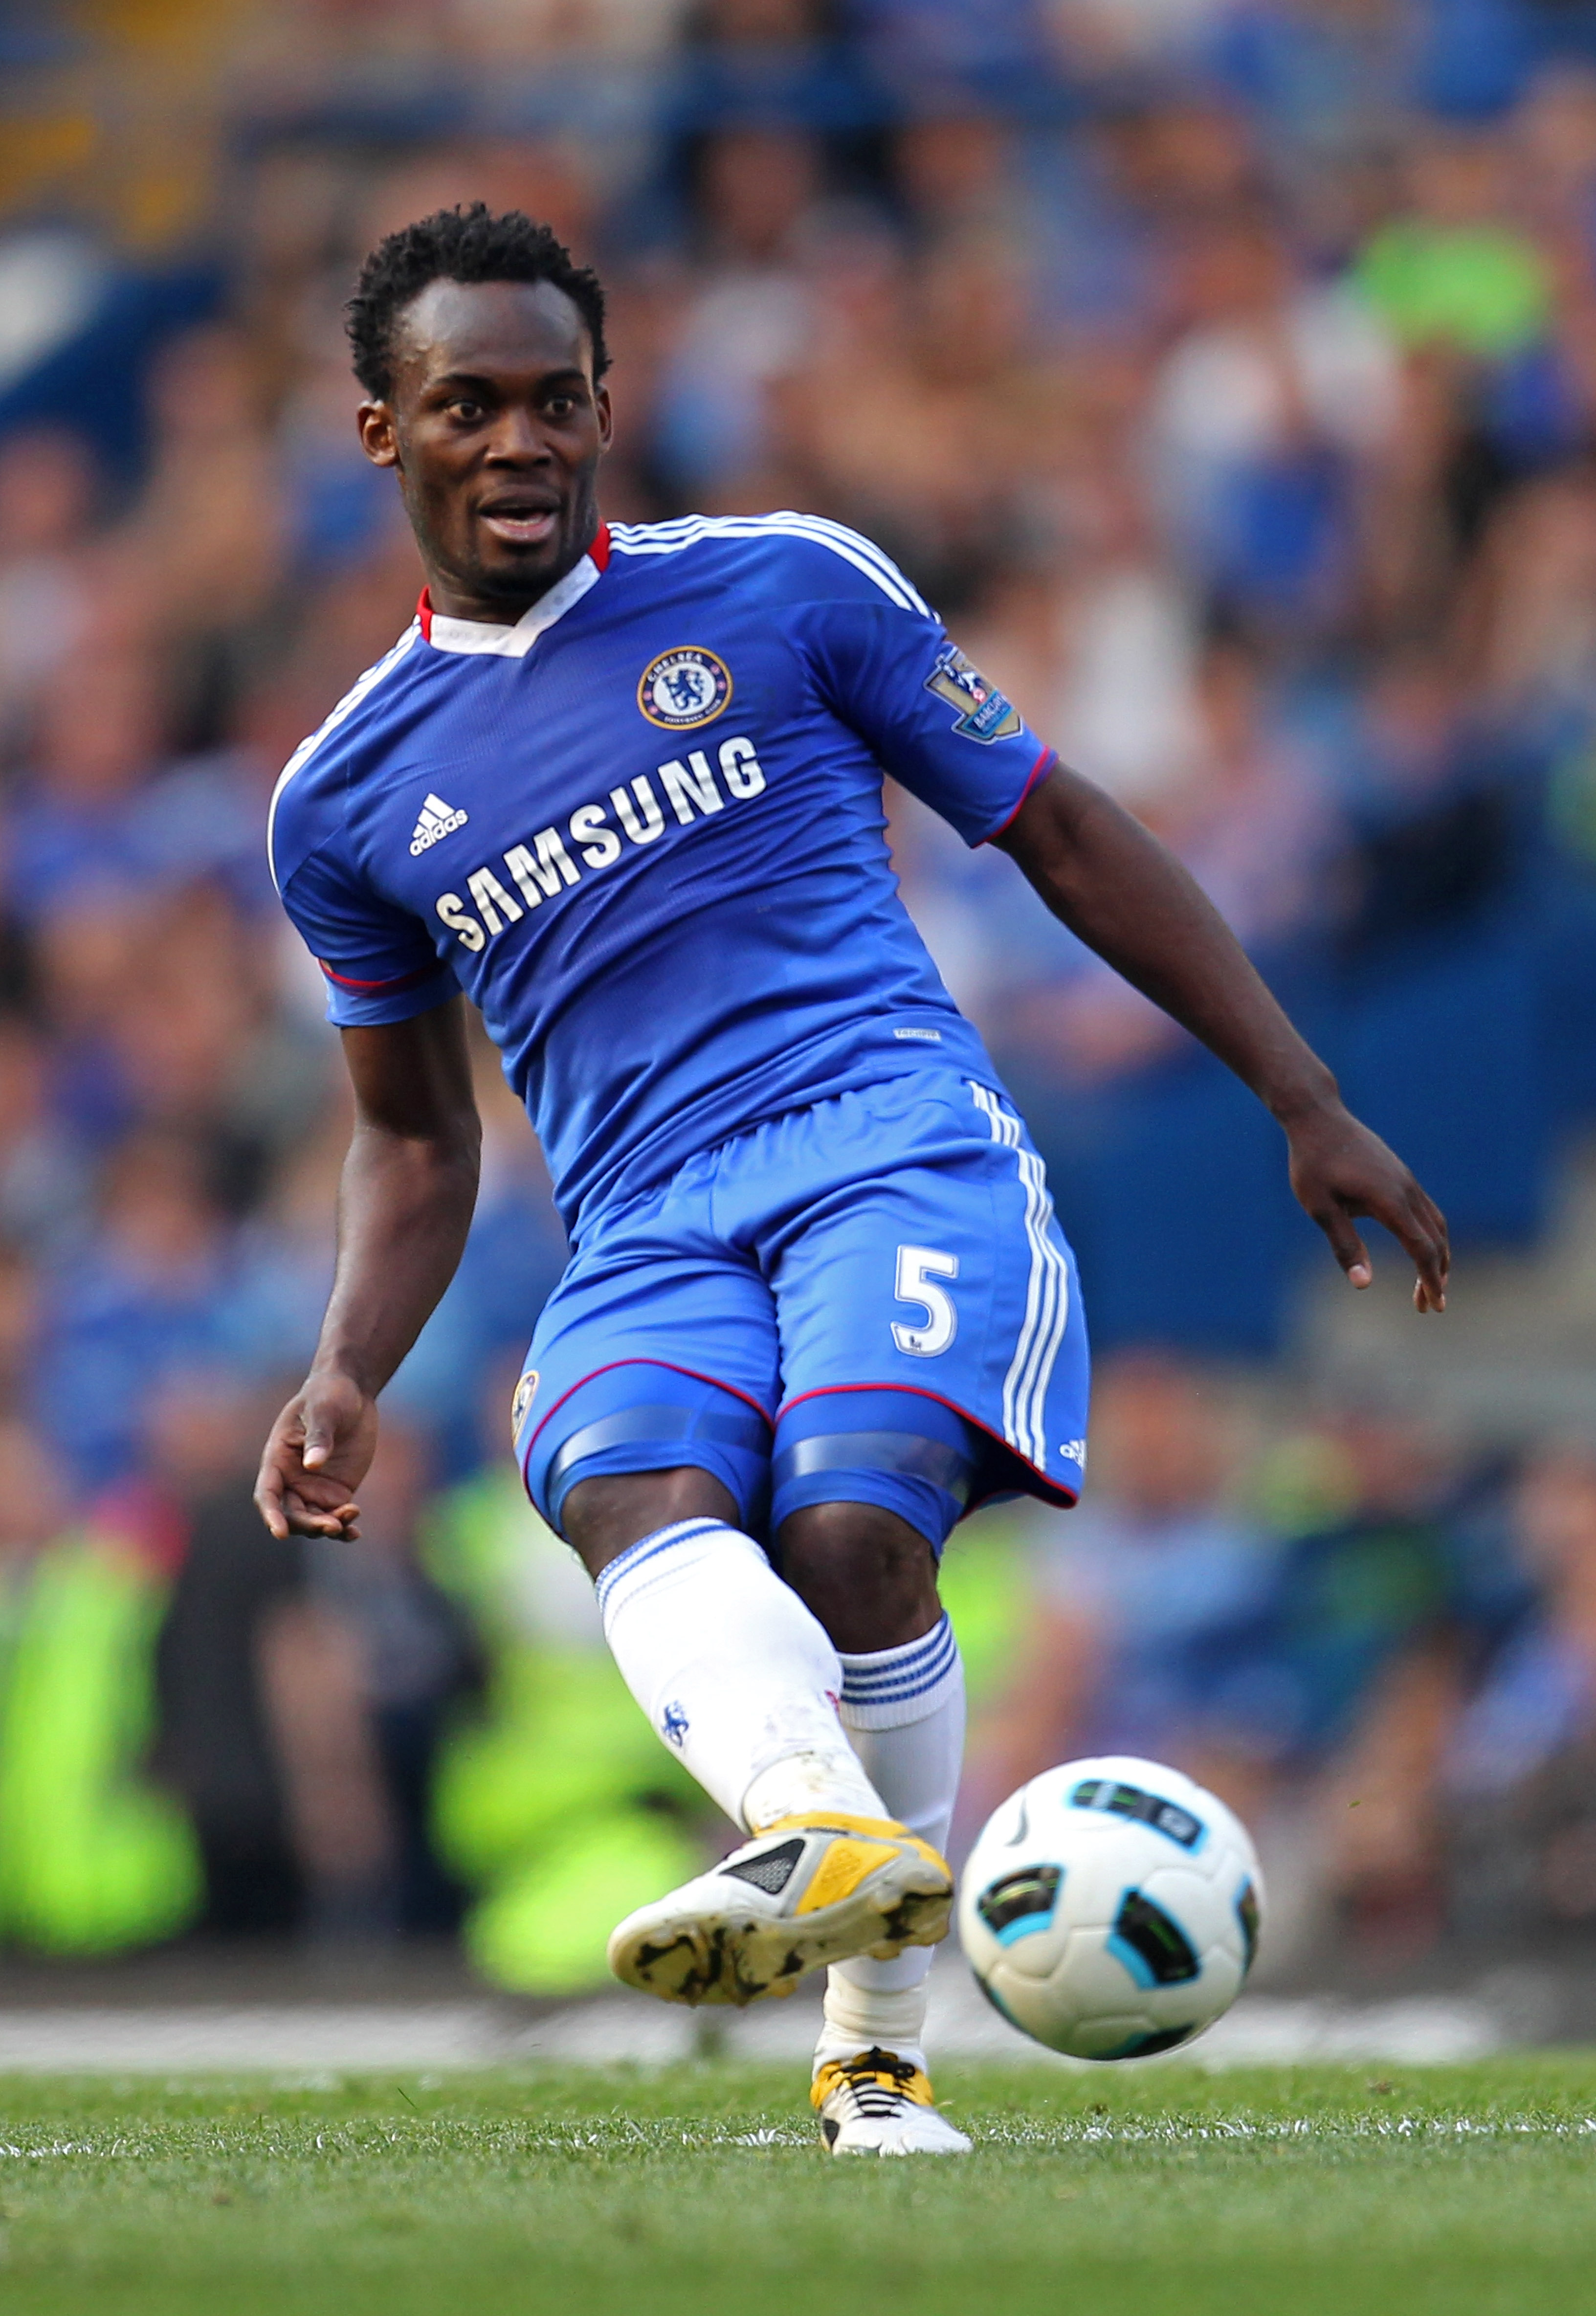 LONDON, ENGLAND - APRIL 30:  Michael Essien of Chelsea passes the ball during the Barclays Premier League match between Chelsea and Tottenham Hotspur at Stamford Bridge on April 30, 2011 in London, England.  (Photo by Scott Heavey/Getty Images)